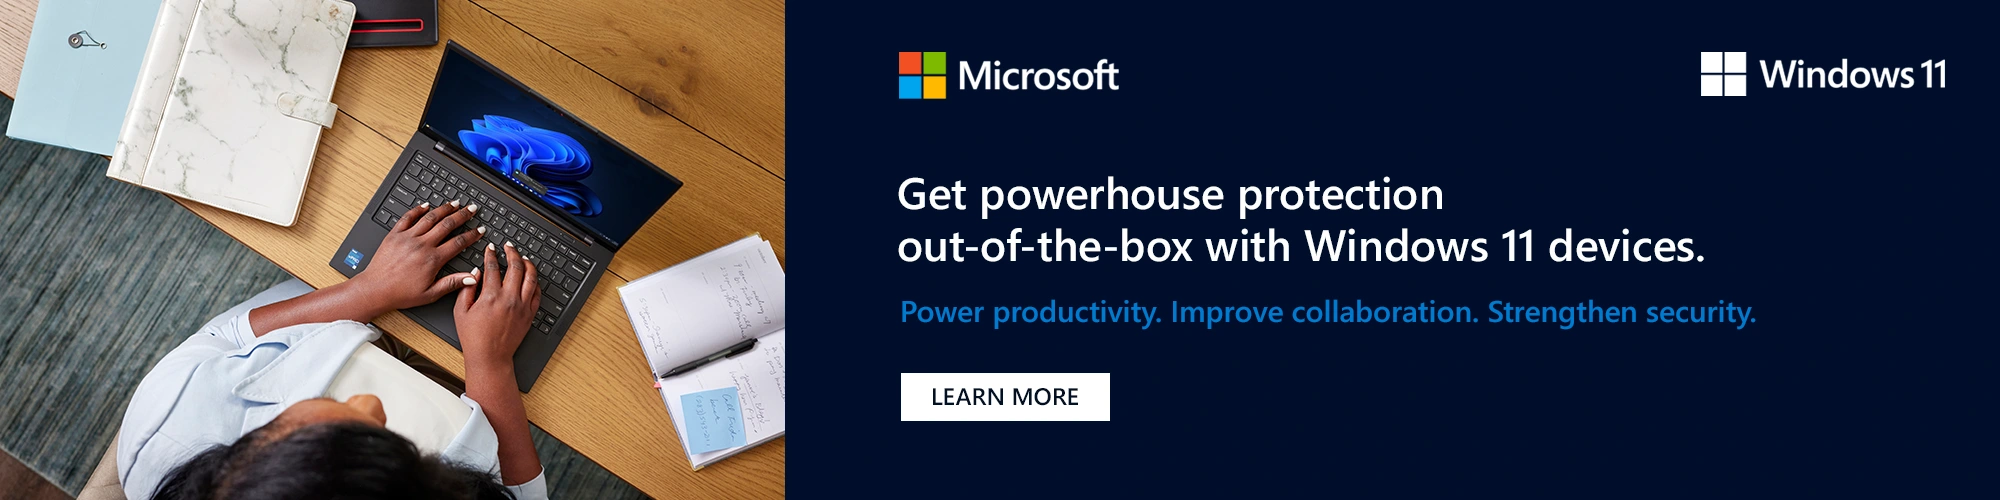 Get powerhouse protection out of the box with Windows 11 devices